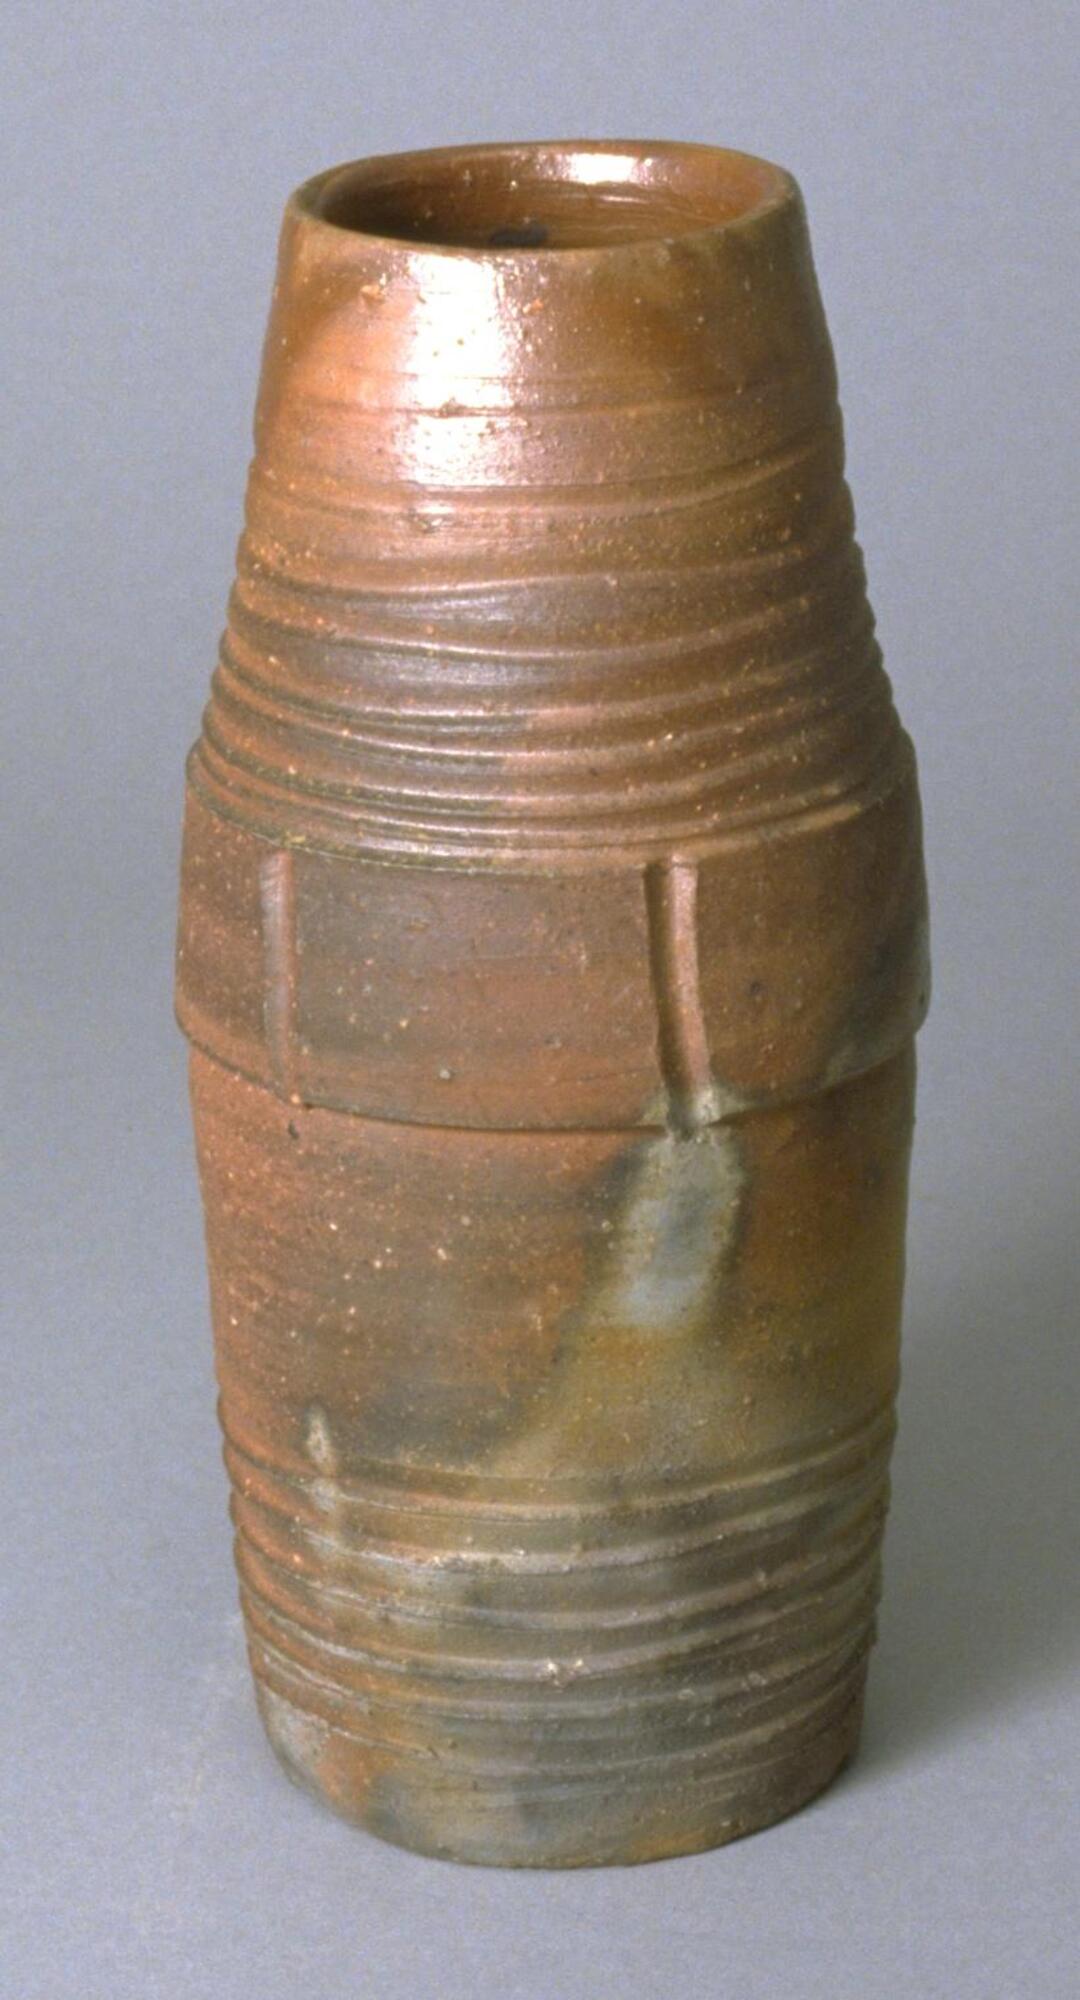 This is a tall, cylindrical vase, slightly bulged at the middle. There are multiple incised lines around the neck and the bottom. The middle part has several vertical incision marks. The bottom is flat. It has a brown body, unglazed, with grayish ash glaze marks.<br />